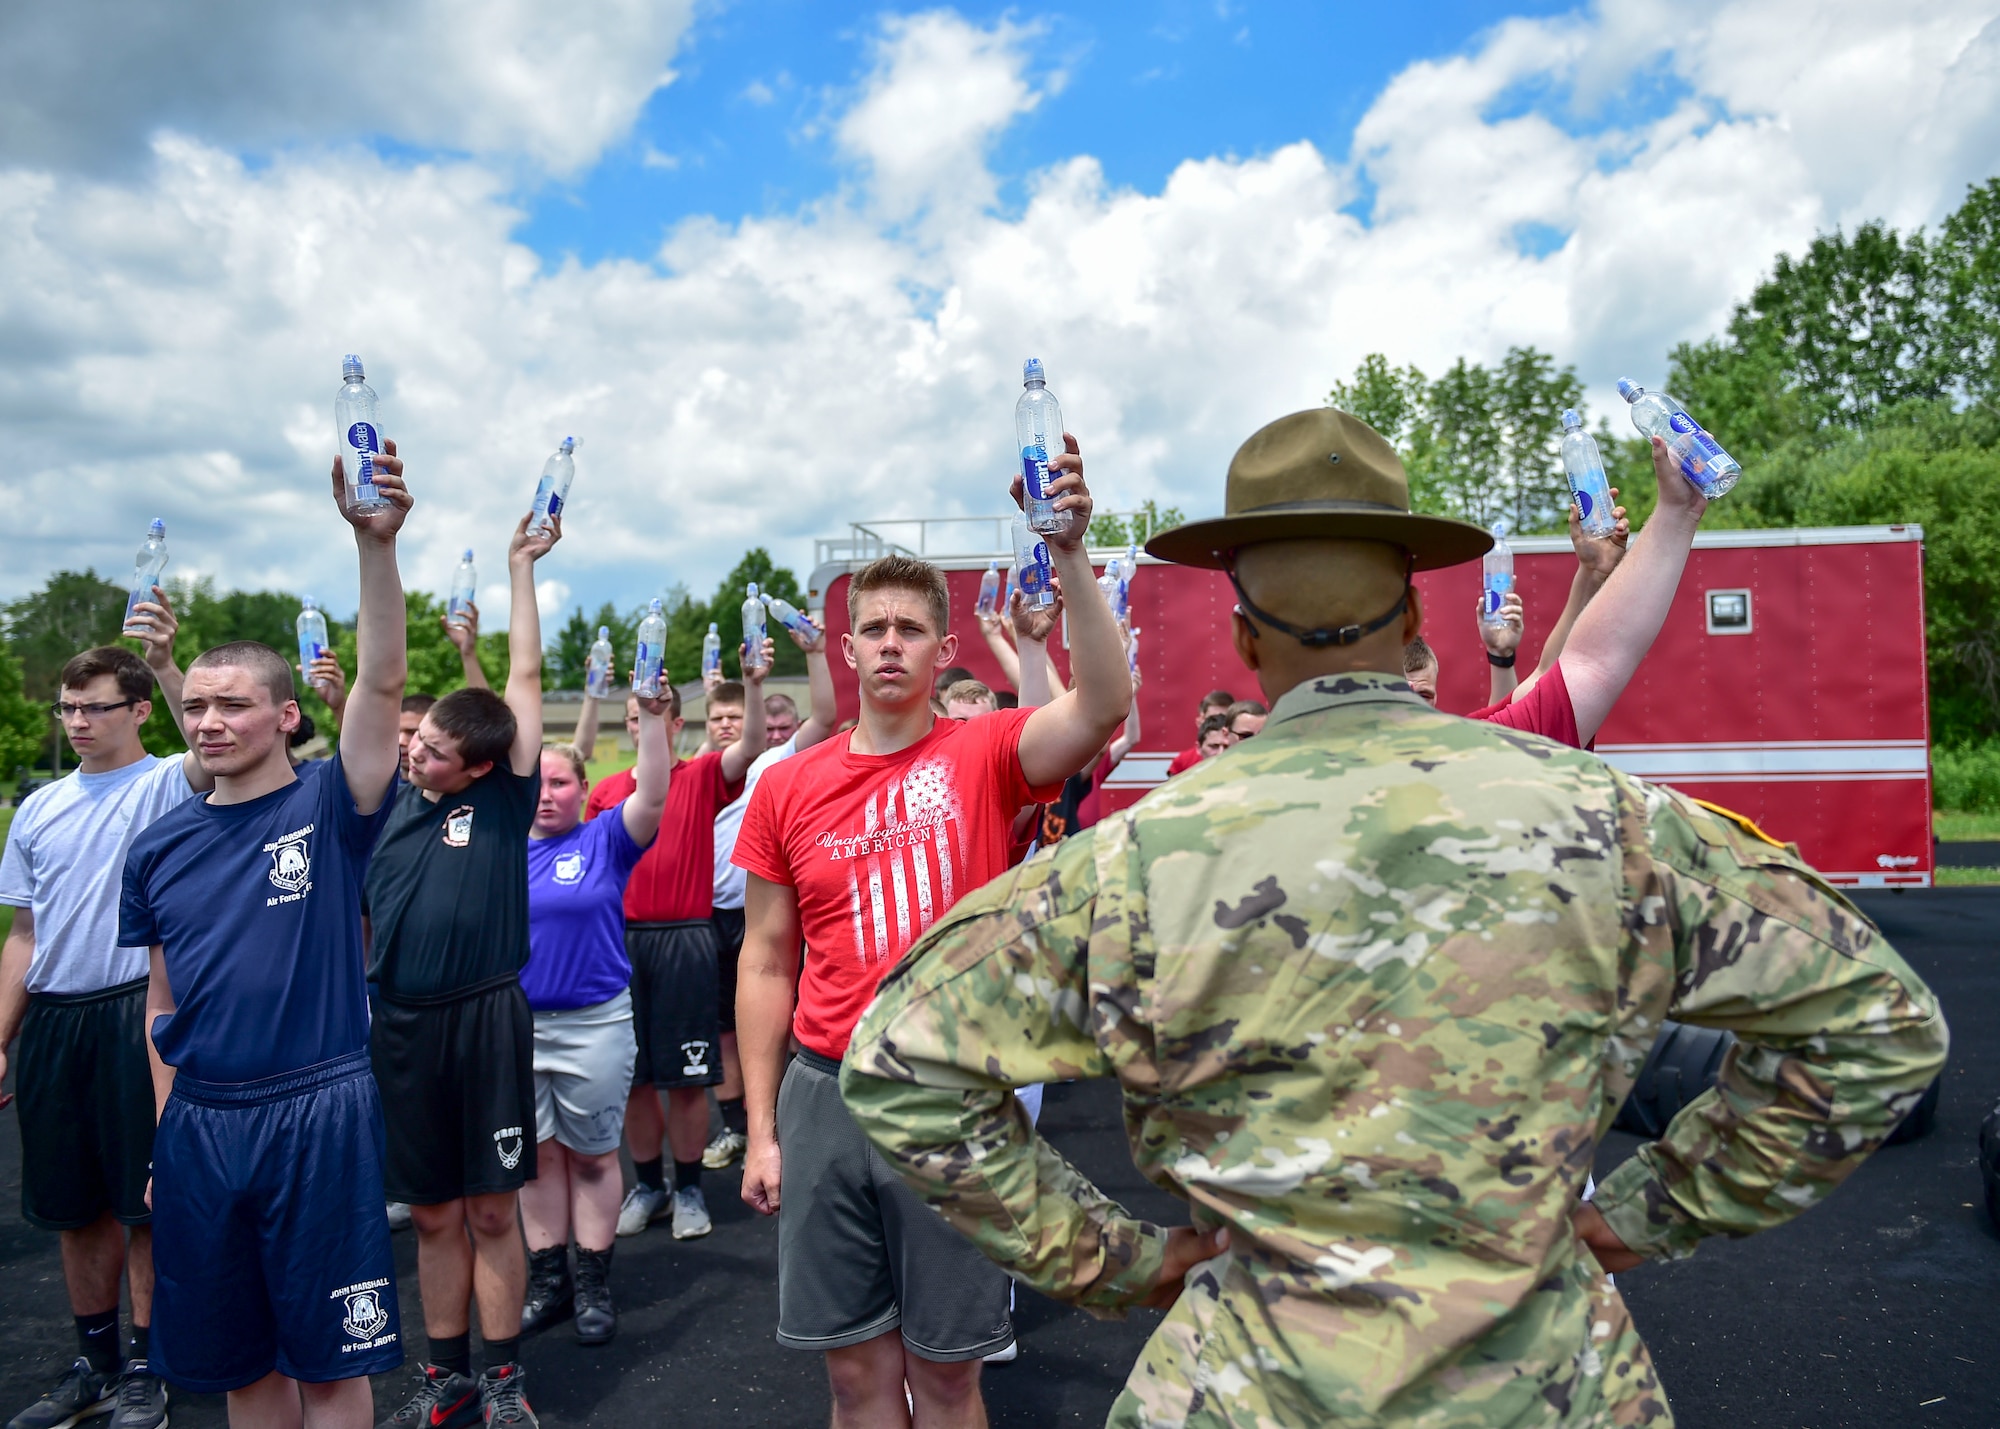 U.S. Army Staff Sgt. Brandon Curry, a drill sergeant with the 1st Bn., 390th Inf. Reg., inspects Junior Reserve Officer Training Corps (JROTC) cadets’ water bottles to ensure they’re hydrating properly during physical training, June 21, 2017. The cadets were here for an encampment facilitated by 910th Airlift Wing Airmen and Curry that provided a five-day experience teaching military skills and replicating aspects of Basic Military Training. JROTC is a program sponsored by the Armed Forces for high school students across the country. (U.S. Air Force photo/Eric White)